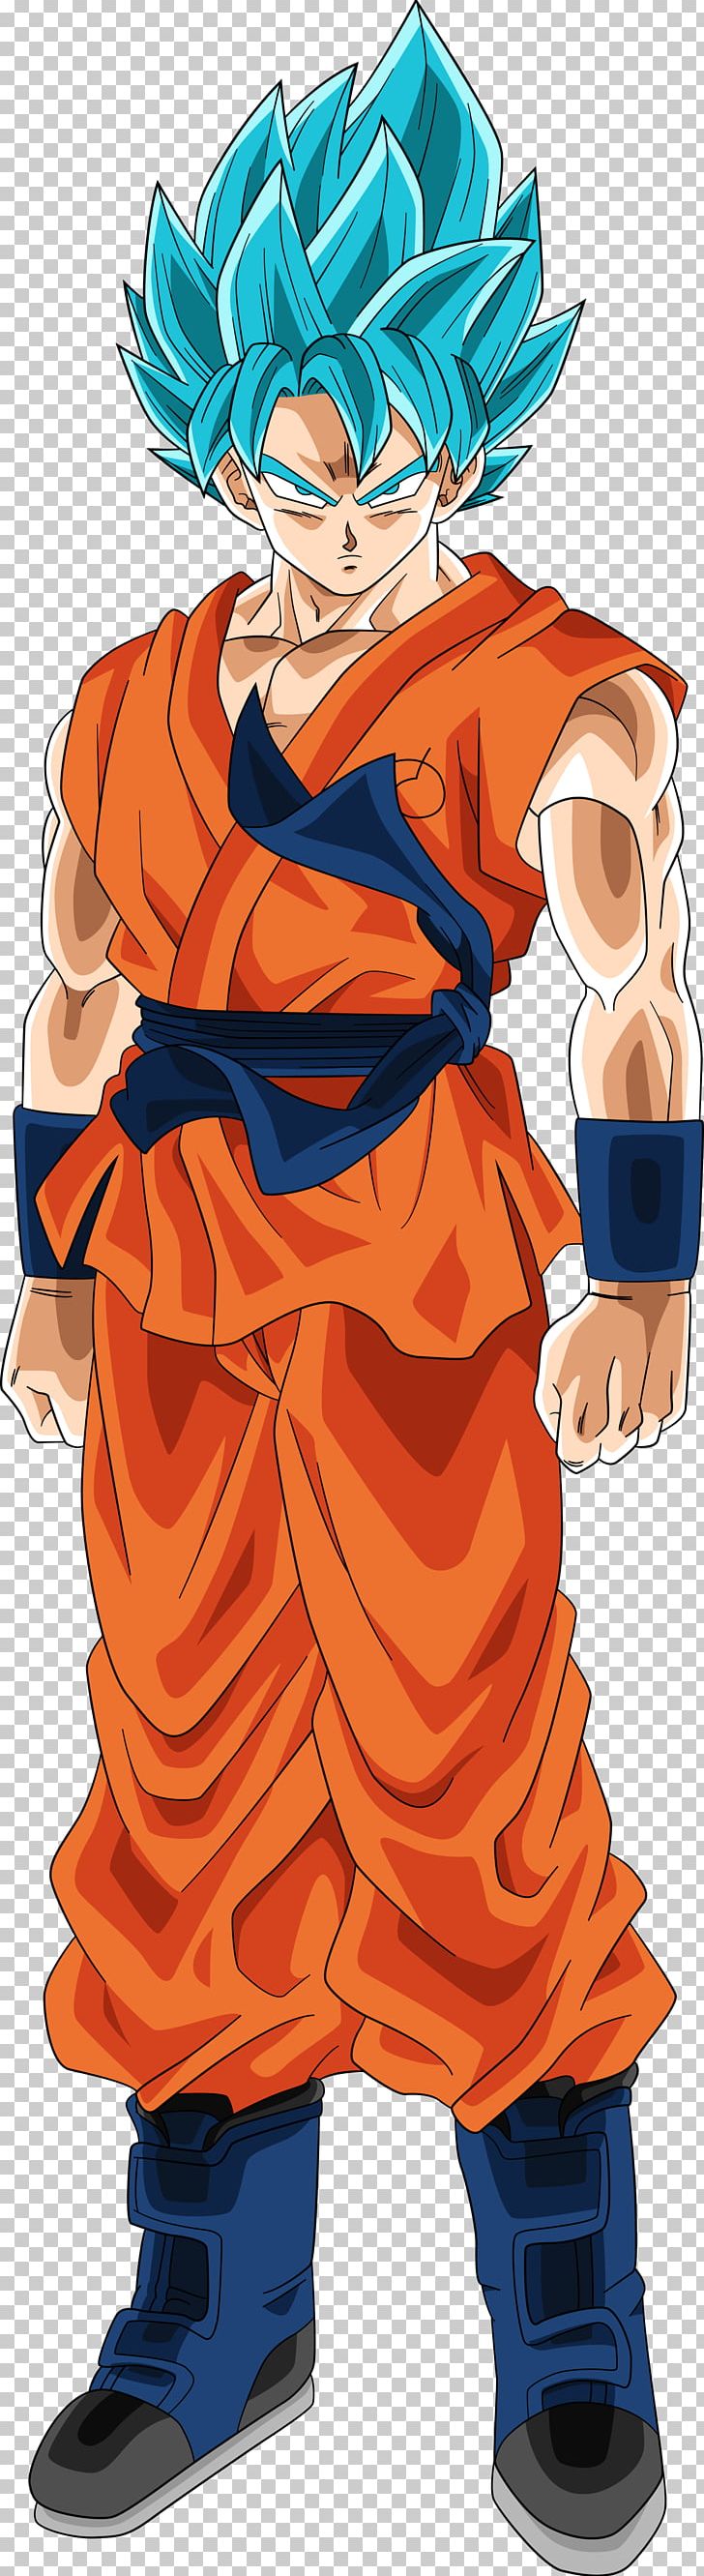 Dragon Ball Heroes Goku Vegeta Piccolo Cell PNG, Clipart, Anime, Art, Cartoon, Cell, Chibi Free PNG Download